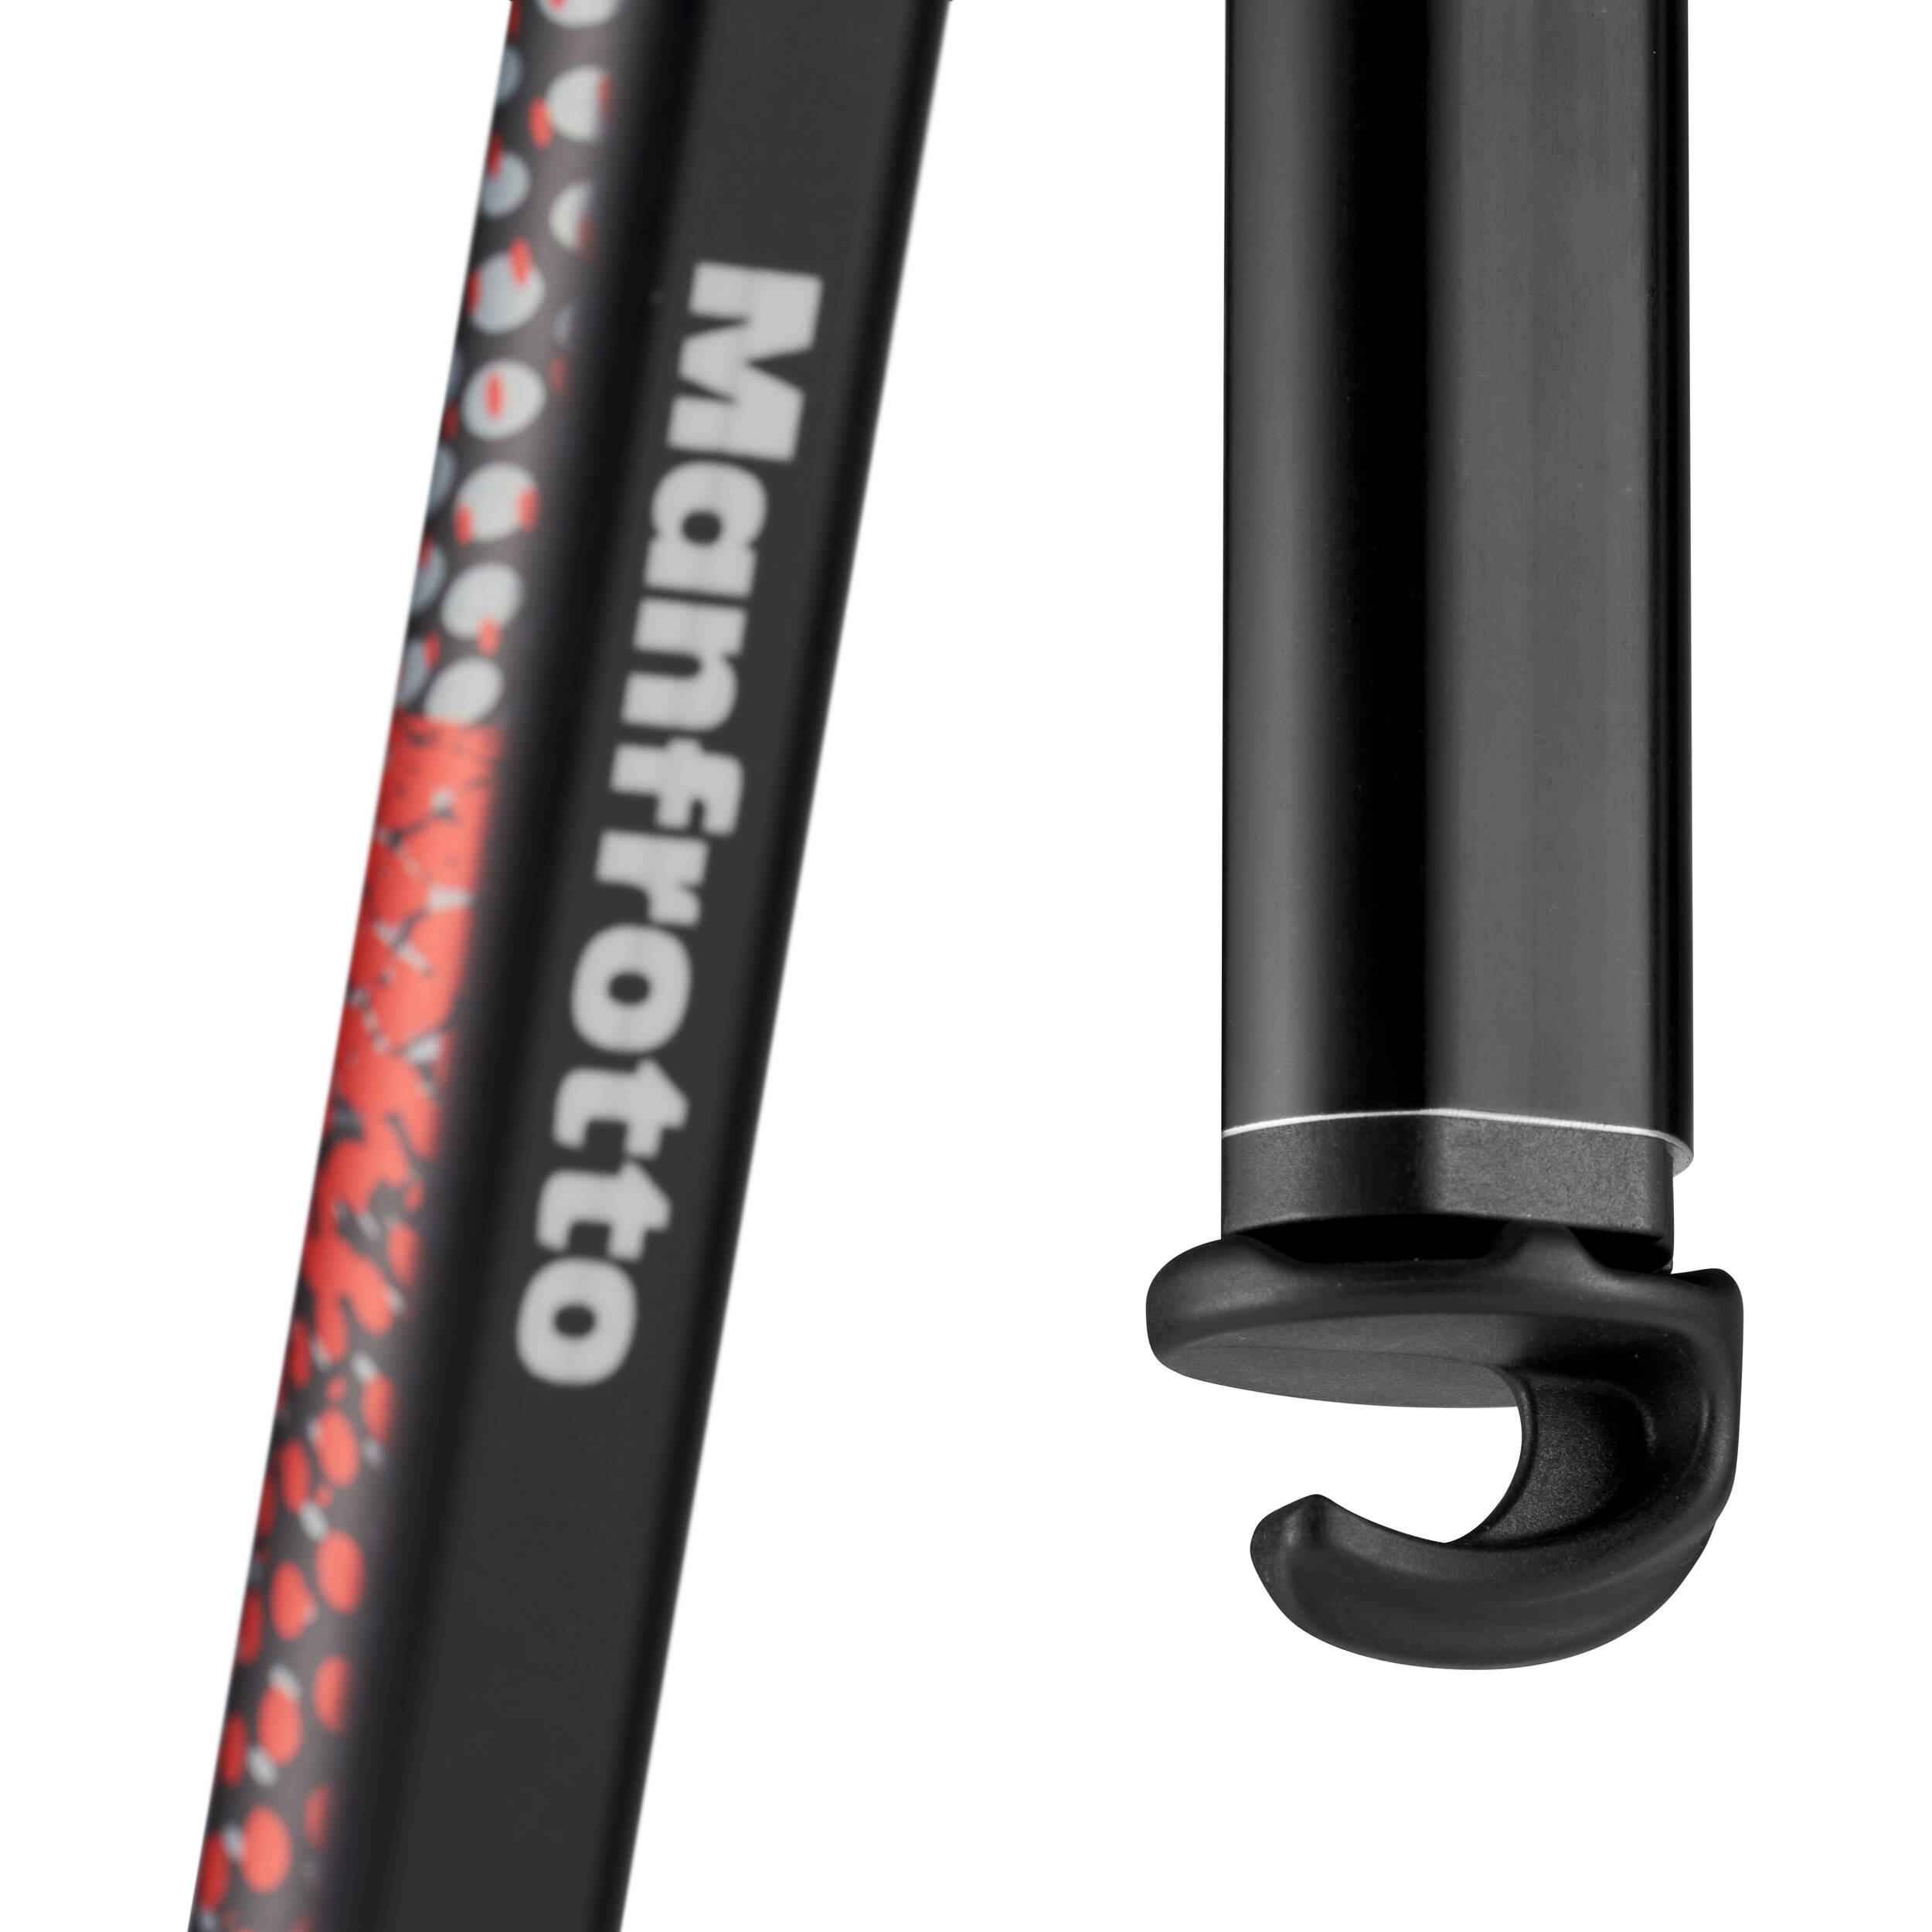 Manfrotto Element MII Mobile Tripod Aluminium With Blutooth Red